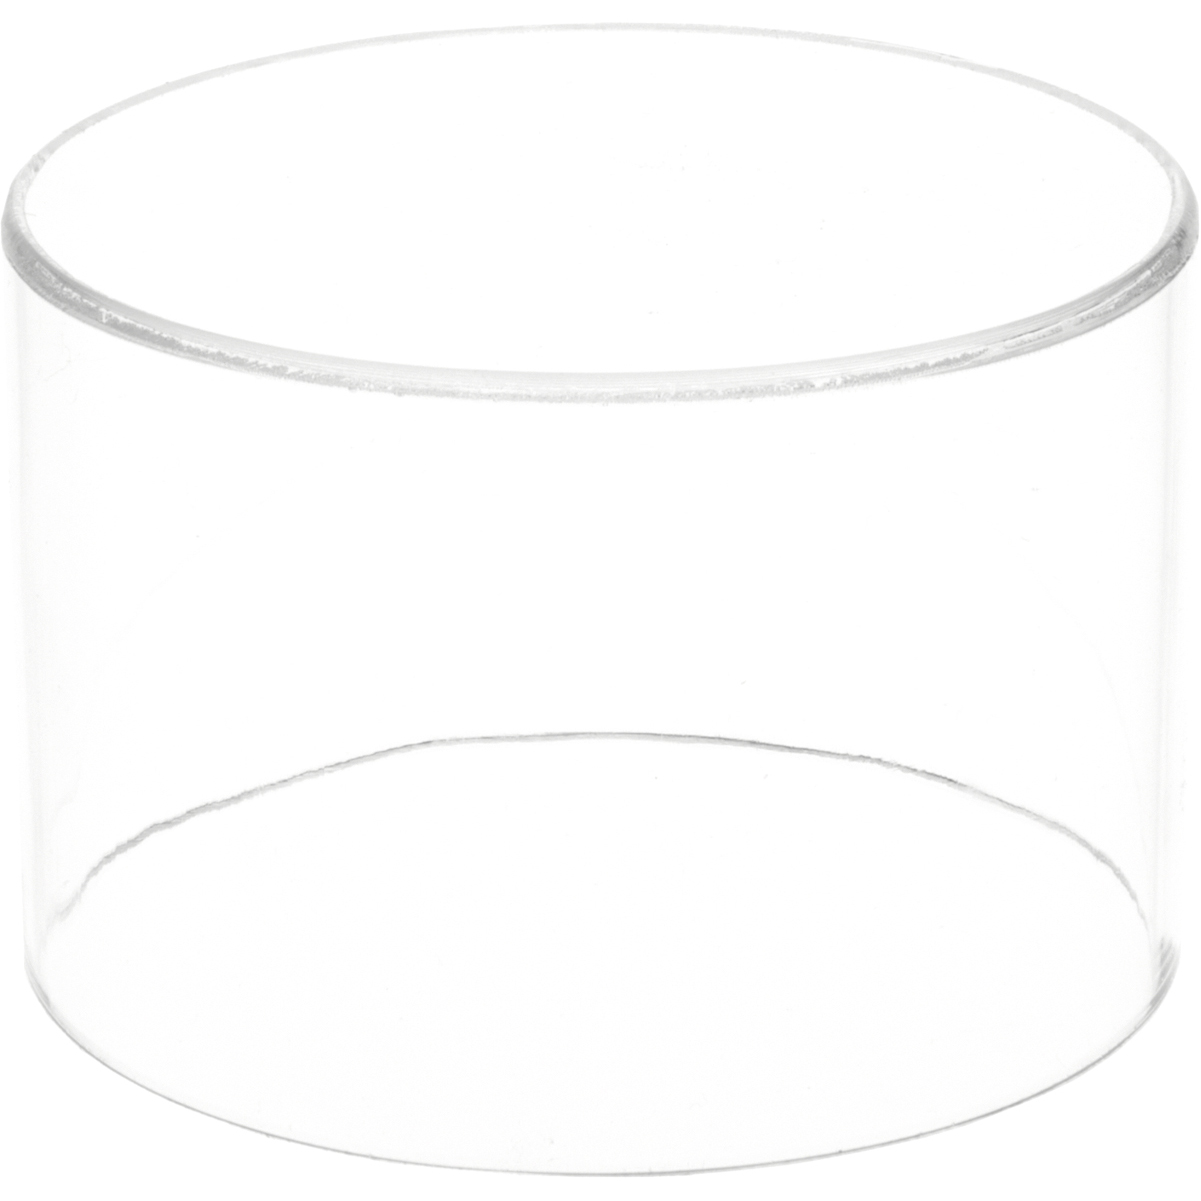 Plymor Clear Acrylic Round Cylinder Display Riser 2" H x 2" D 